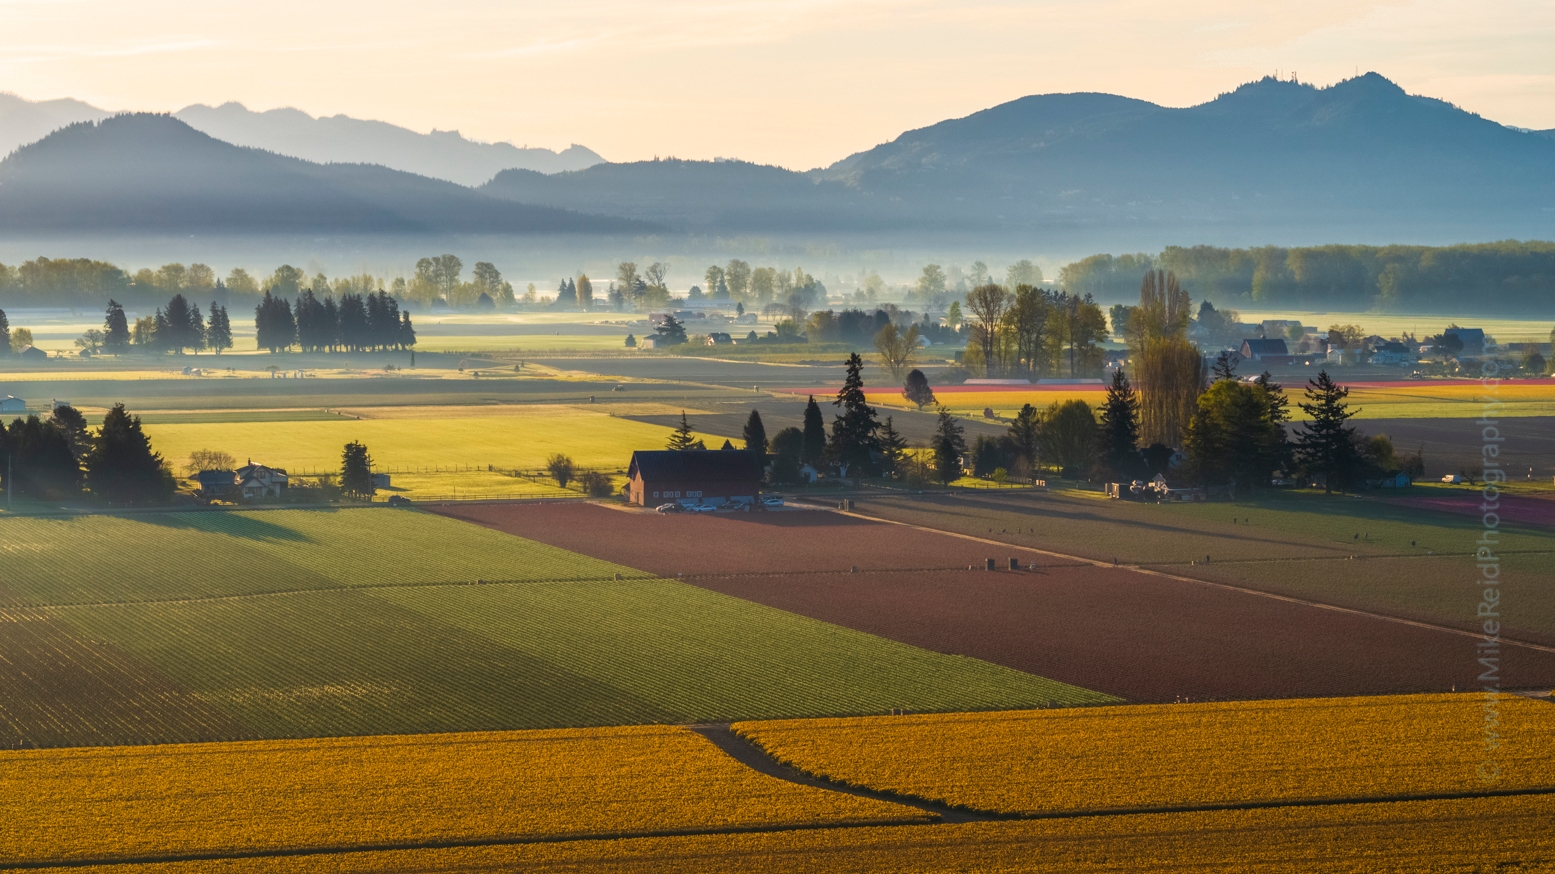 Over the Skagit Valley Fields and Mist